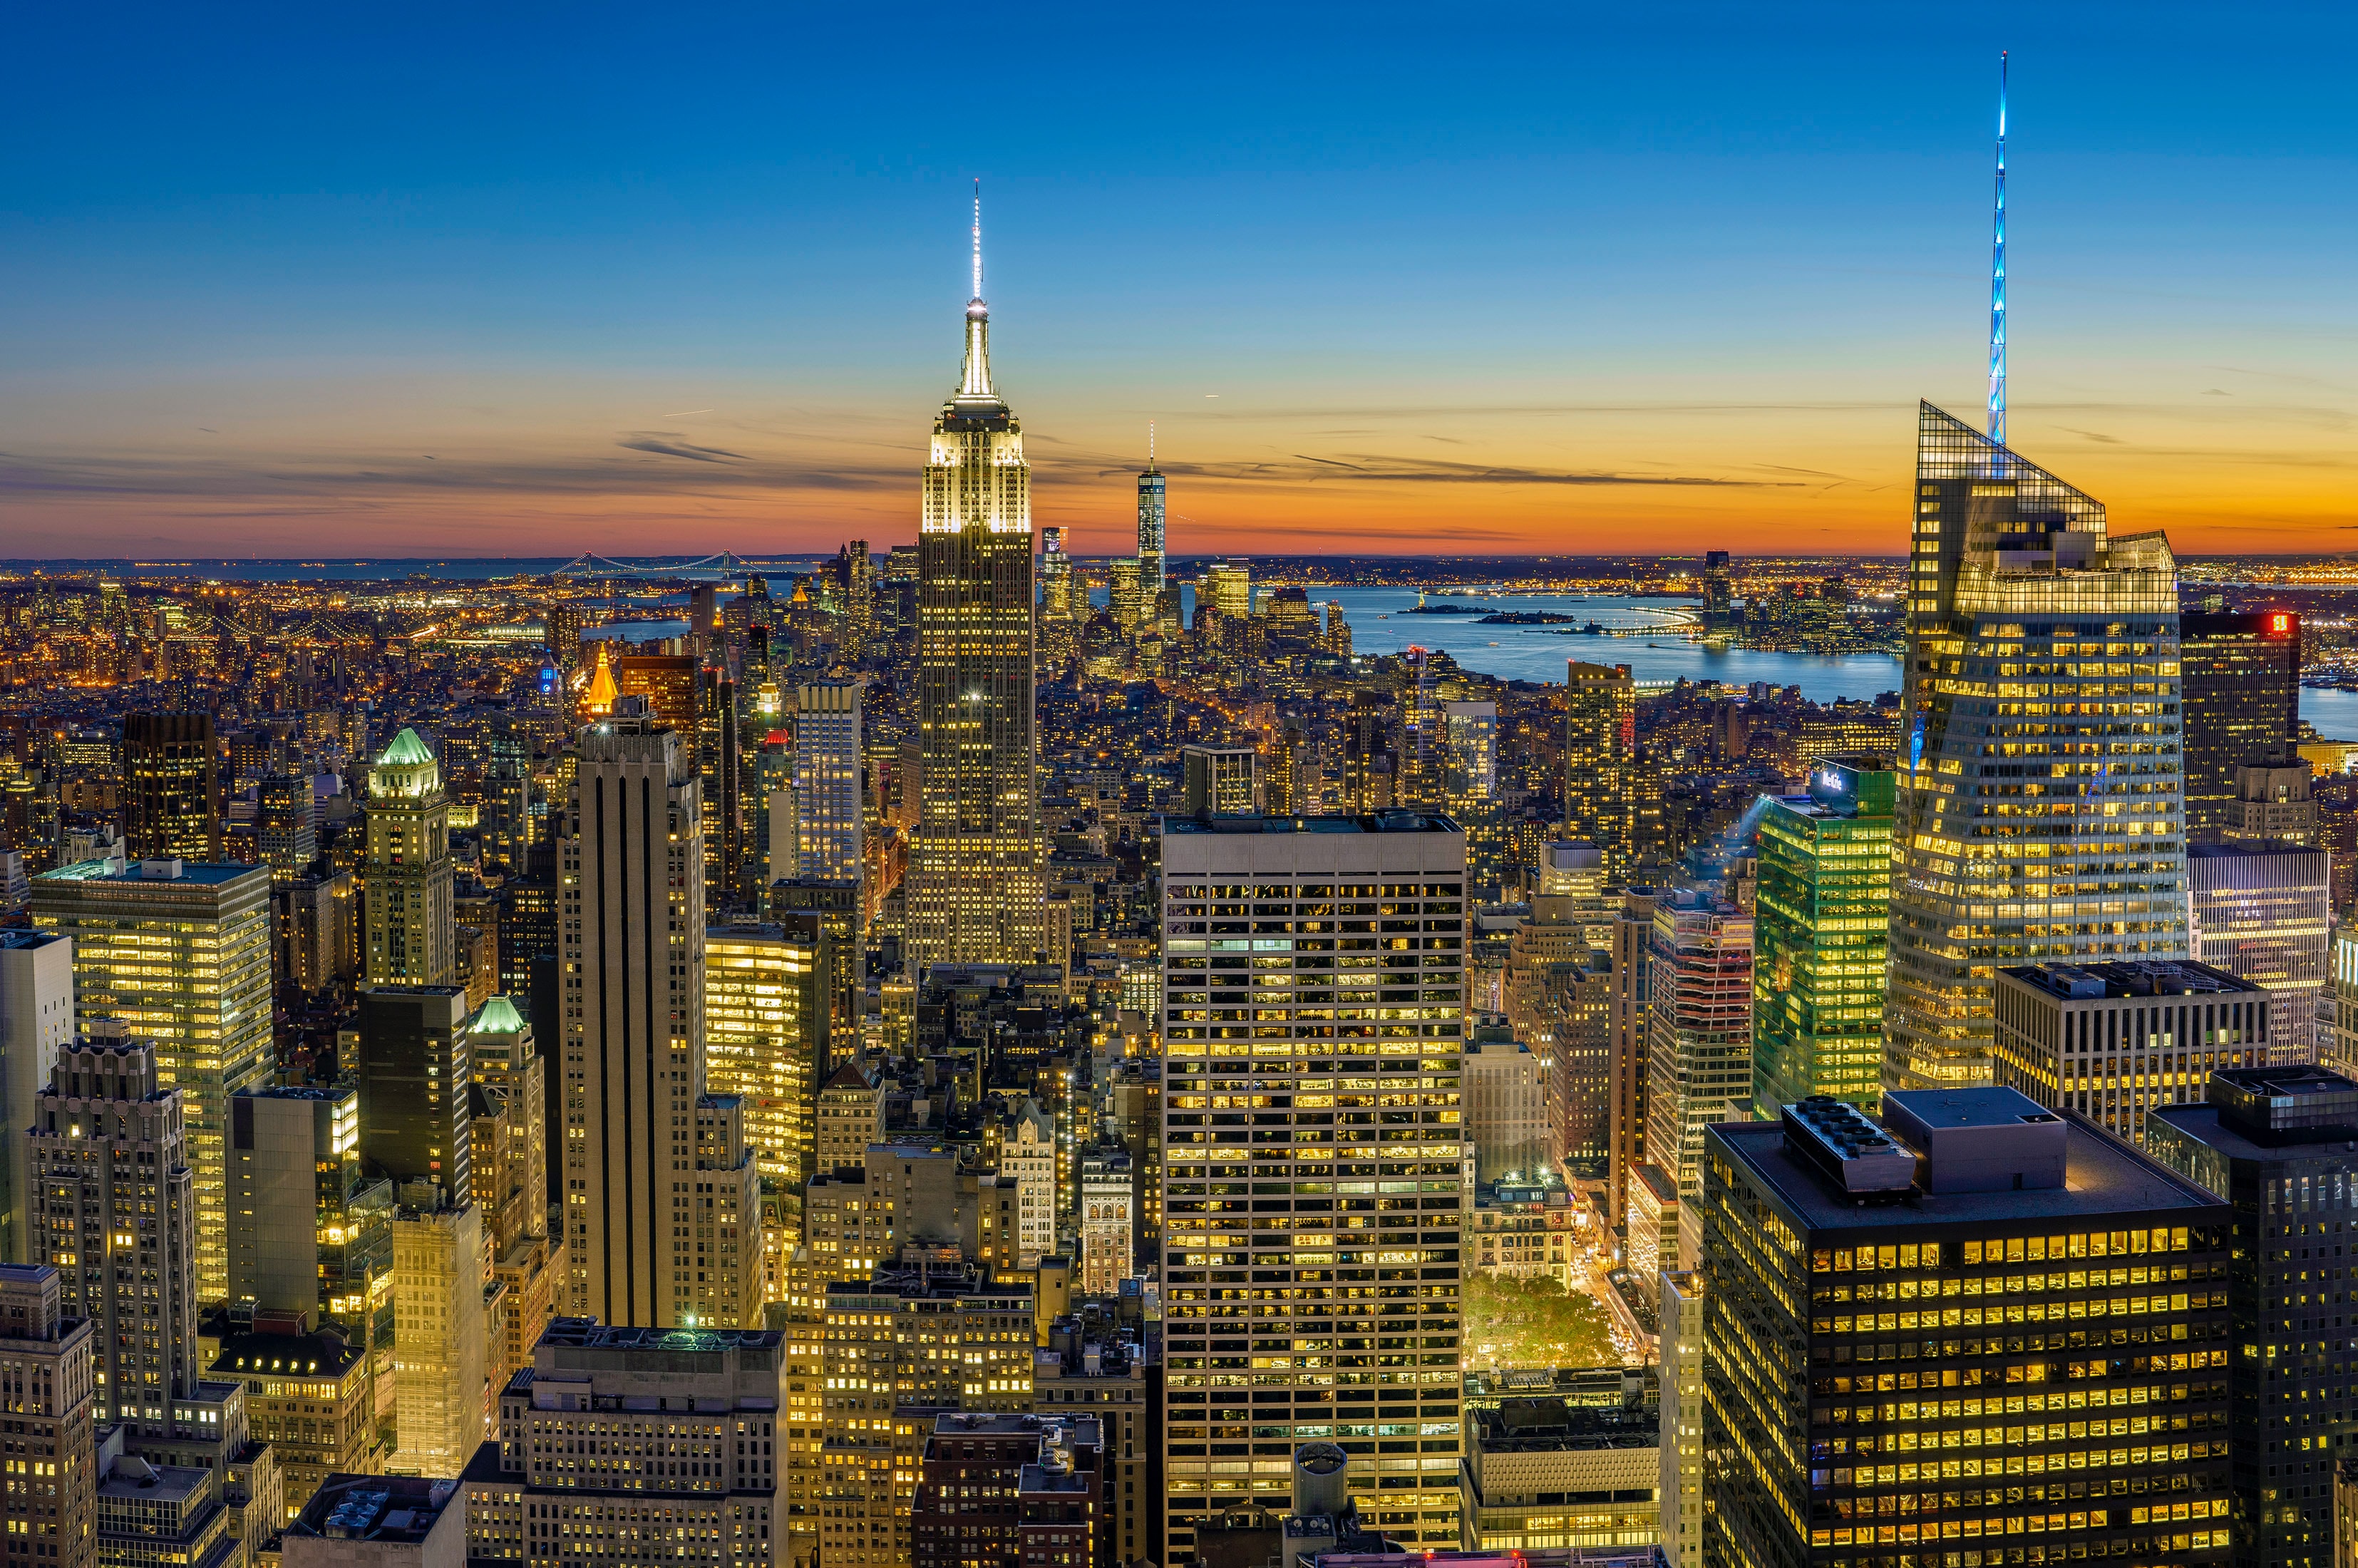 A wide, overhead view of the city of New York at twilight.